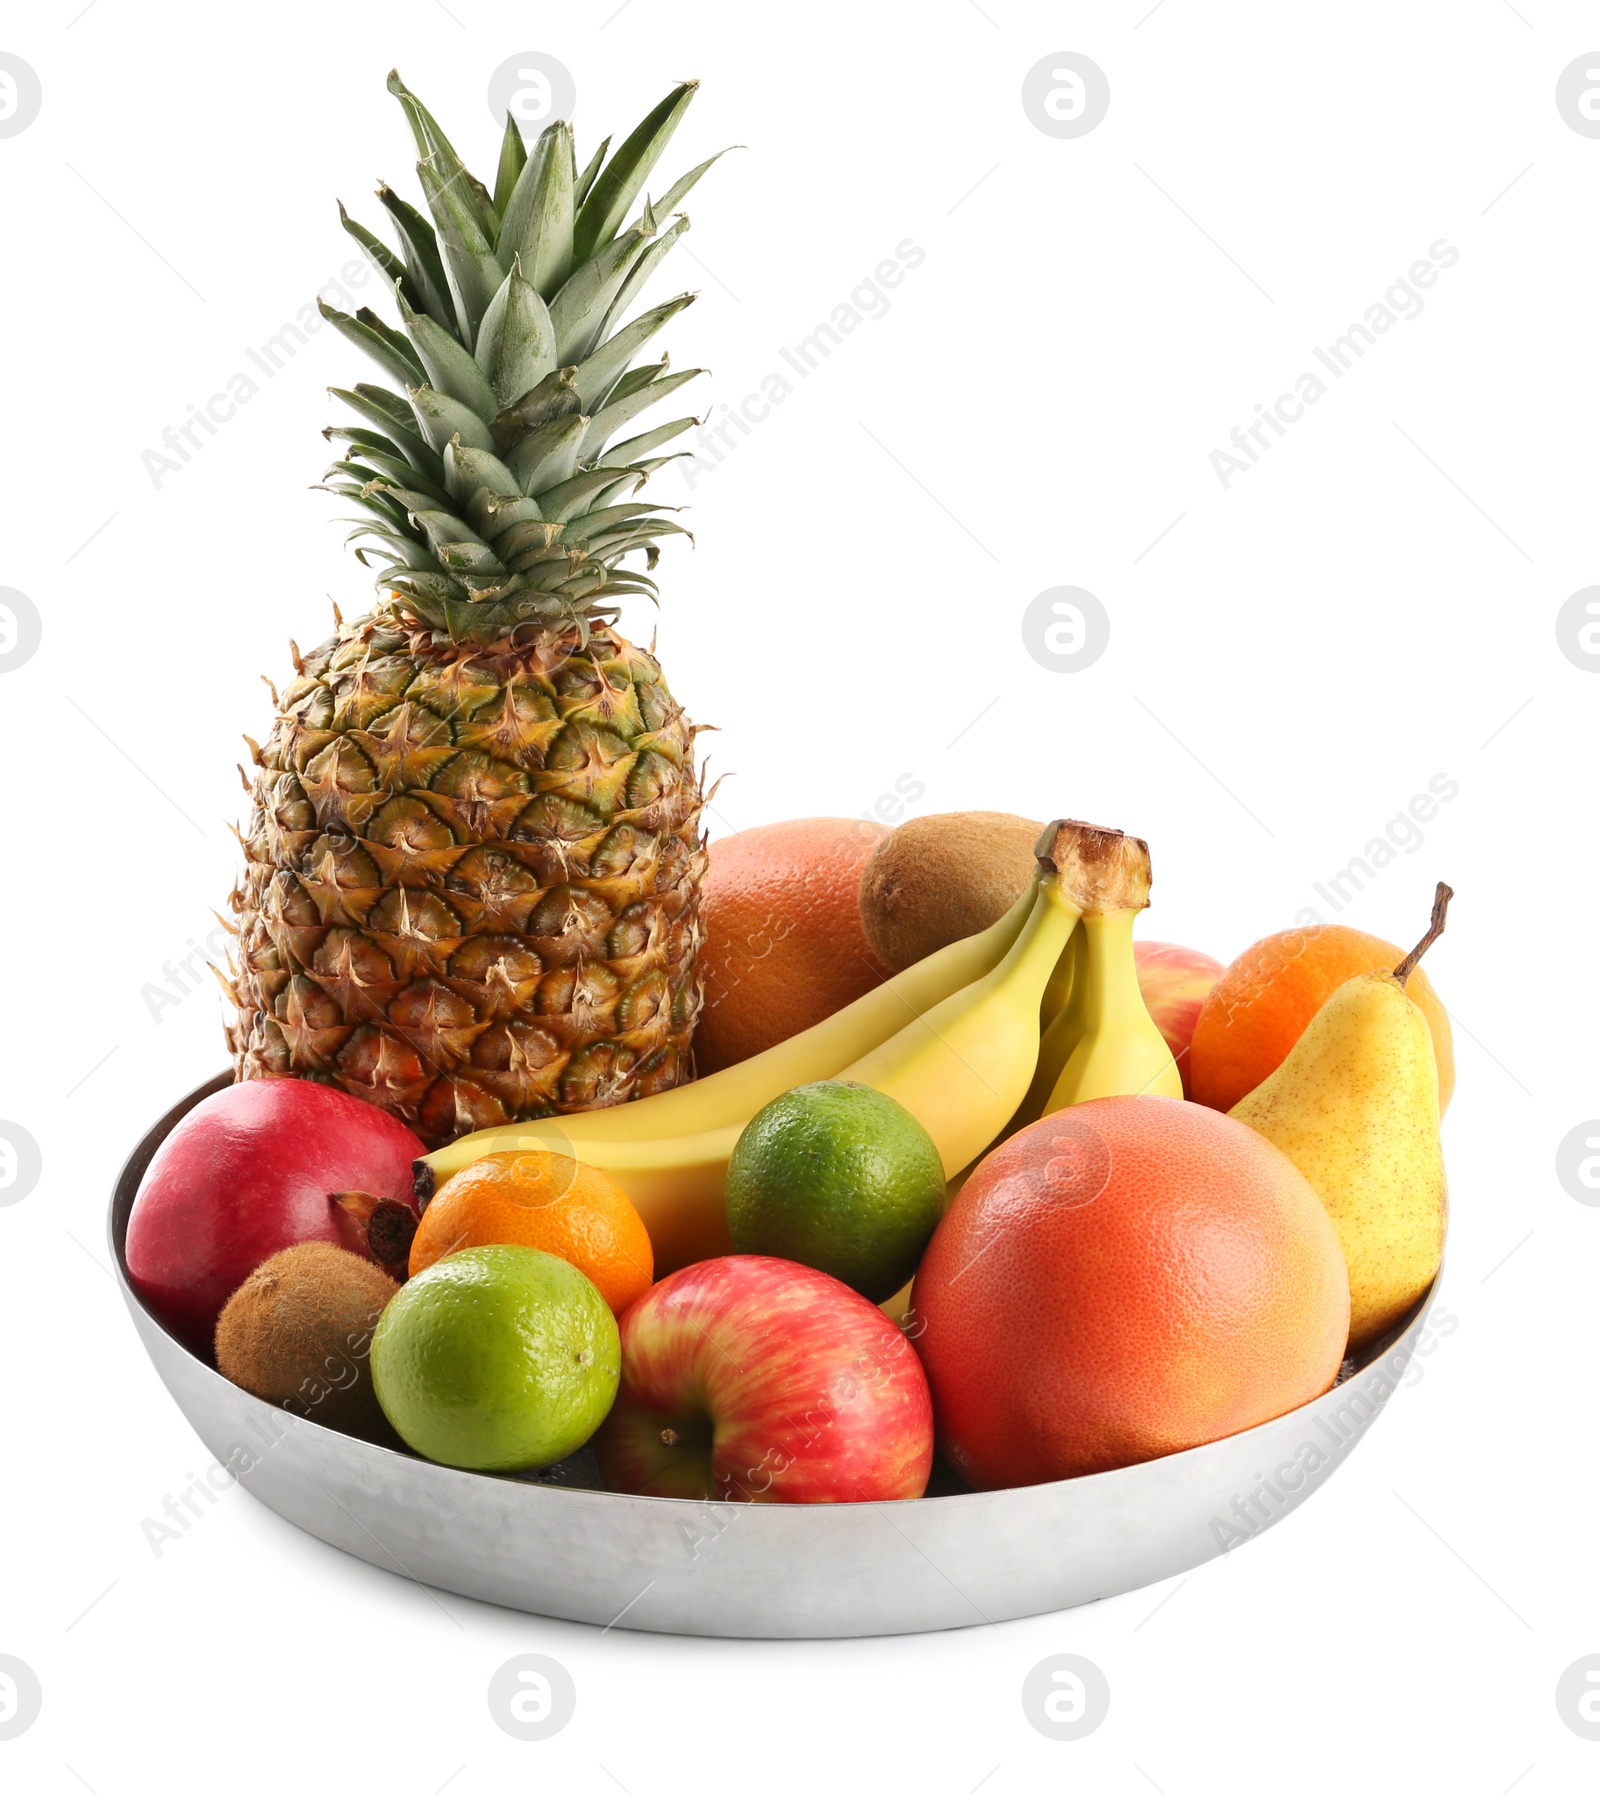 Photo of Tray with different ripe fruits on white background